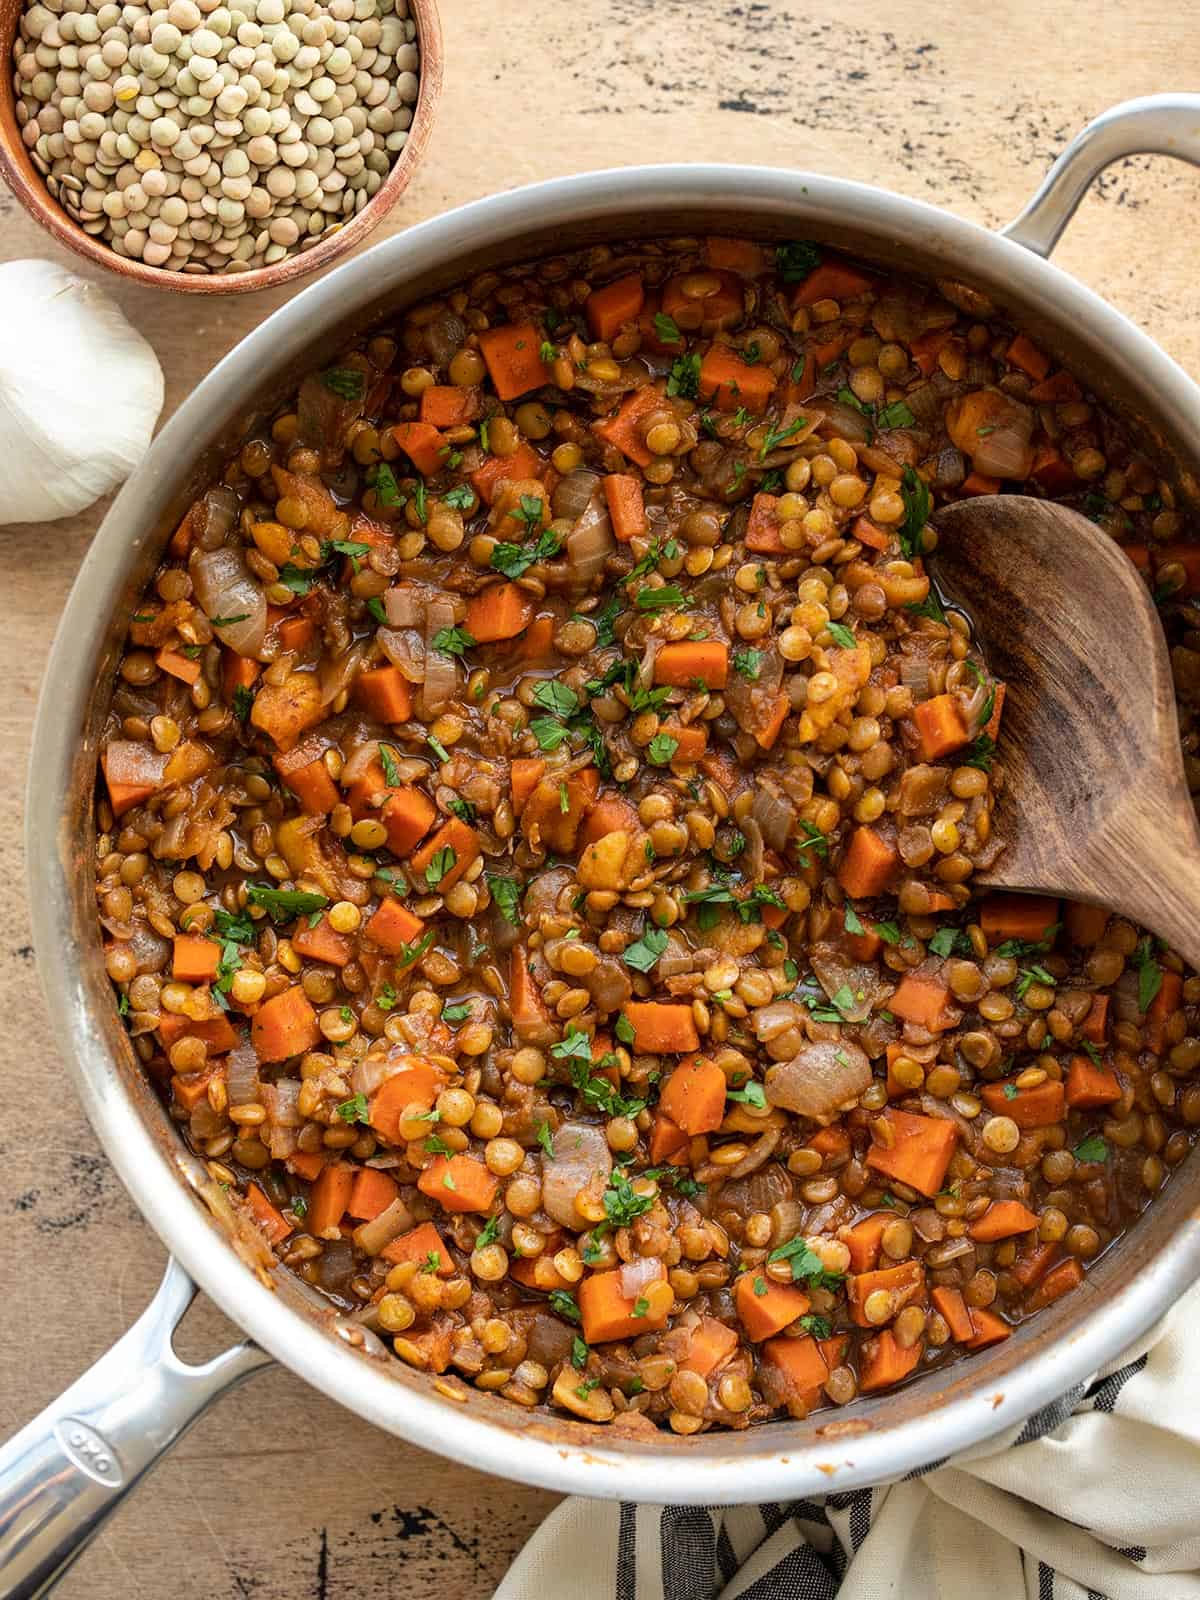 Overhead view of spiced lentils with carrots in a skillet